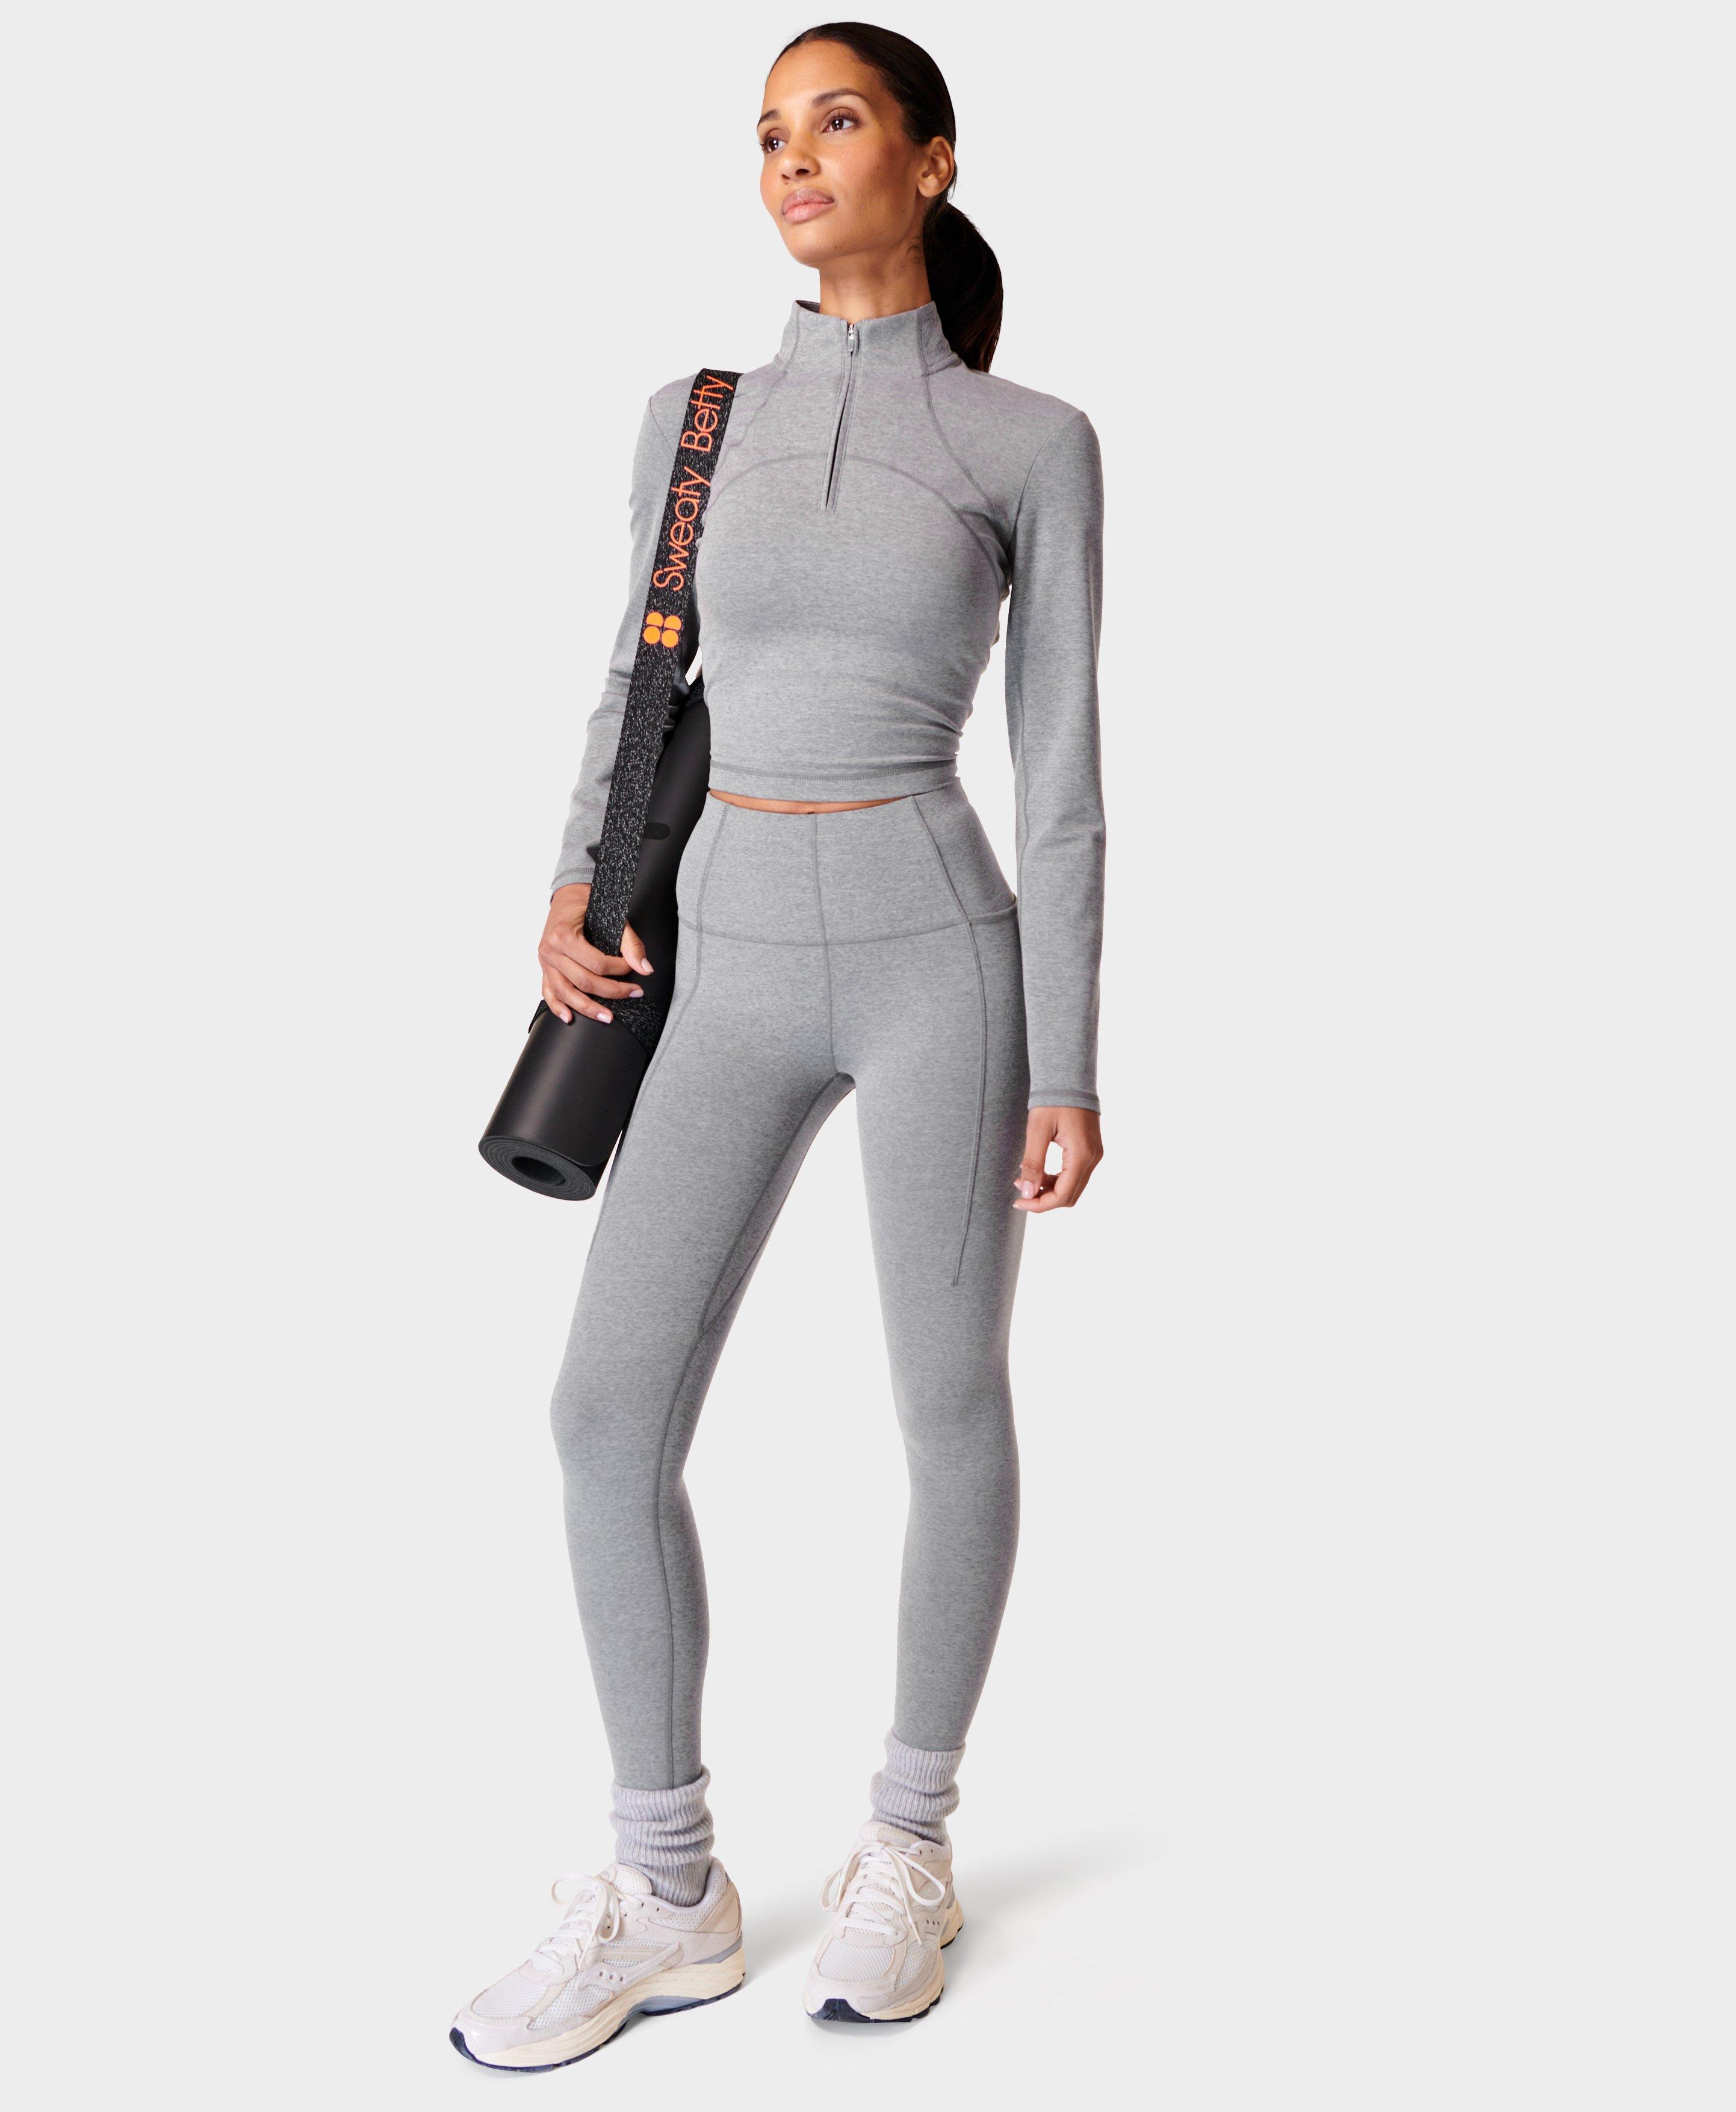 Sweaty Betty Sale - Shop up to 60% off